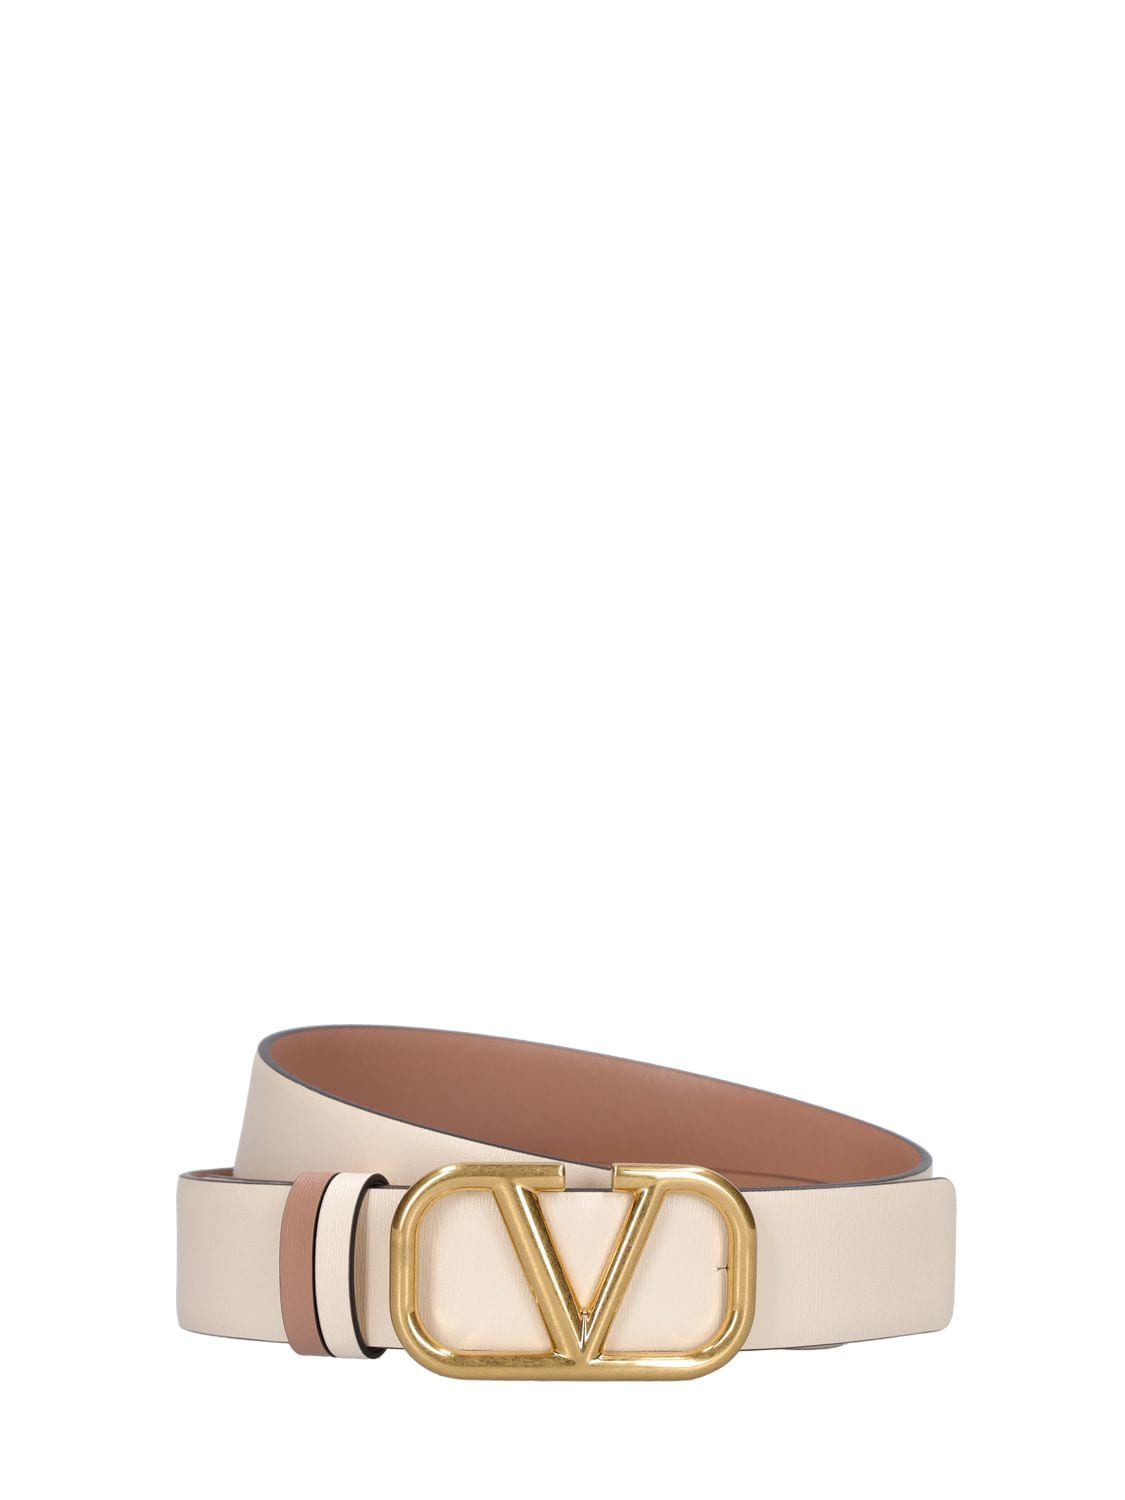 Valentino by Mario Valentino Women's Giusy Leather Belt (60% off) –  Comparable Value $350